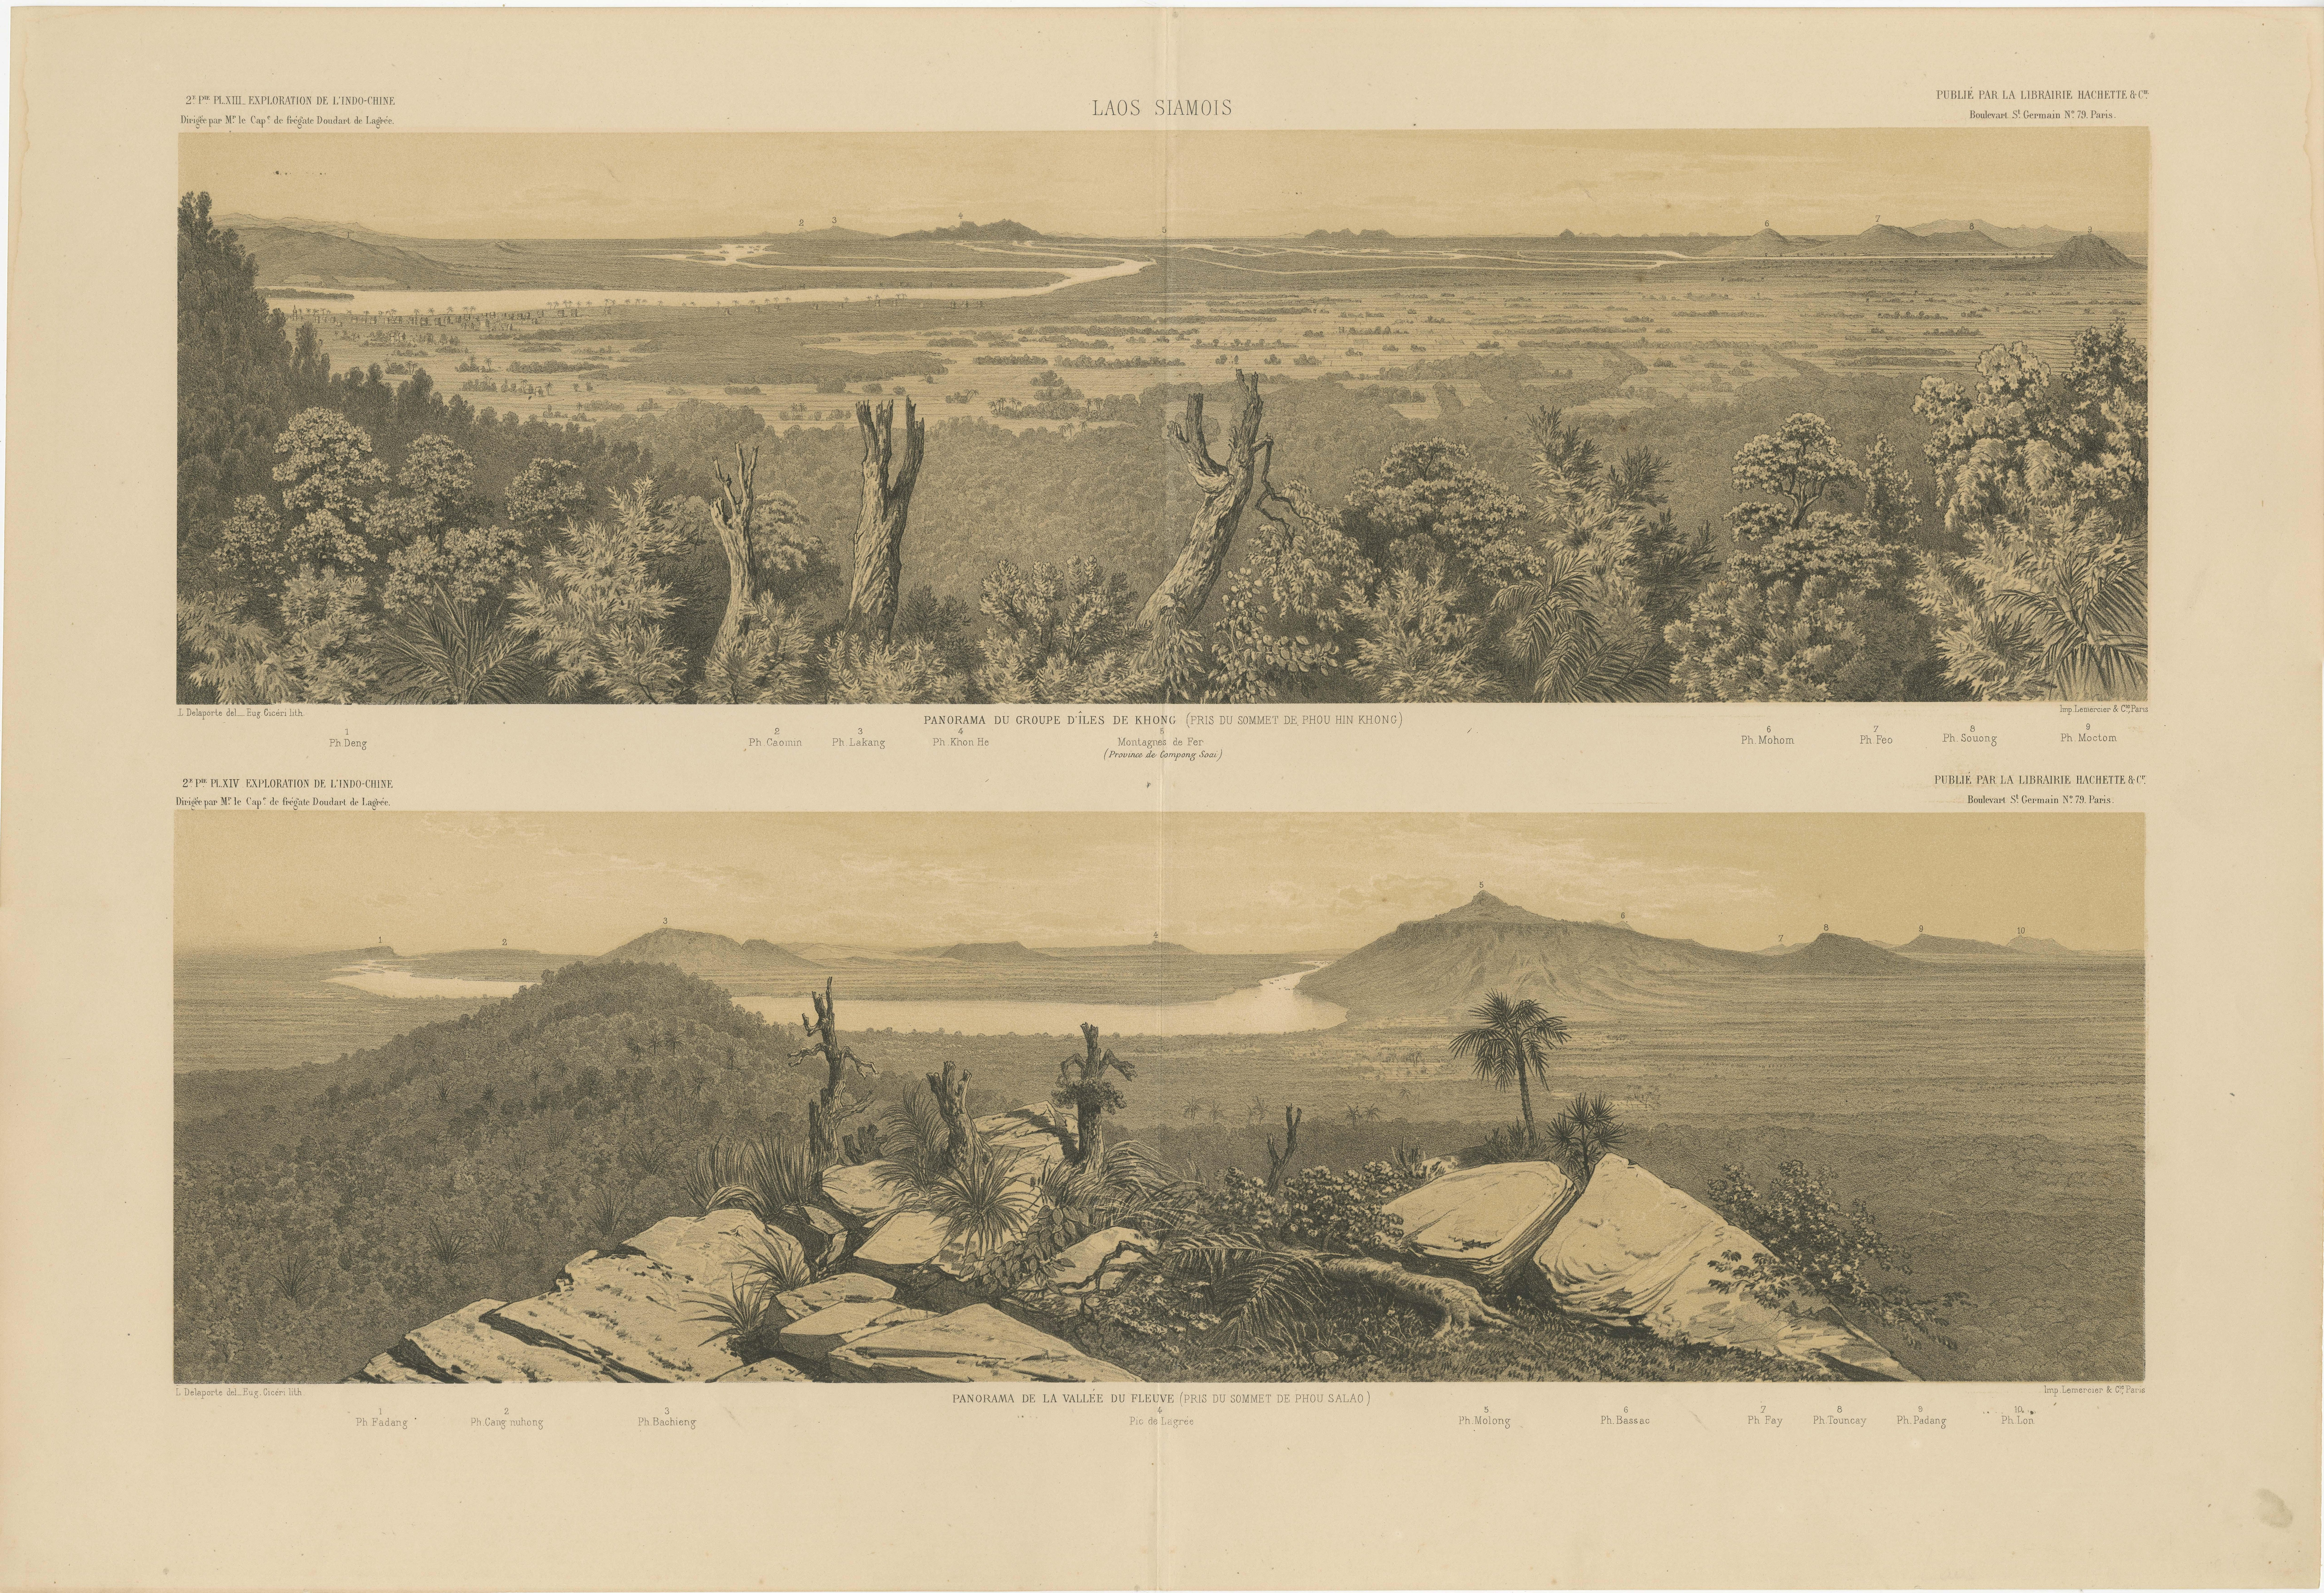 Antique print titled 'Laos Siamois'. Two views on one sheet titled 'Panorama du groupe d'Iles de Khong' and 'Panorama de la vallée du fleuve'. Panoramic views of Khong Island and a valley, Laos. This print originates from 'Voyage d'exploration en